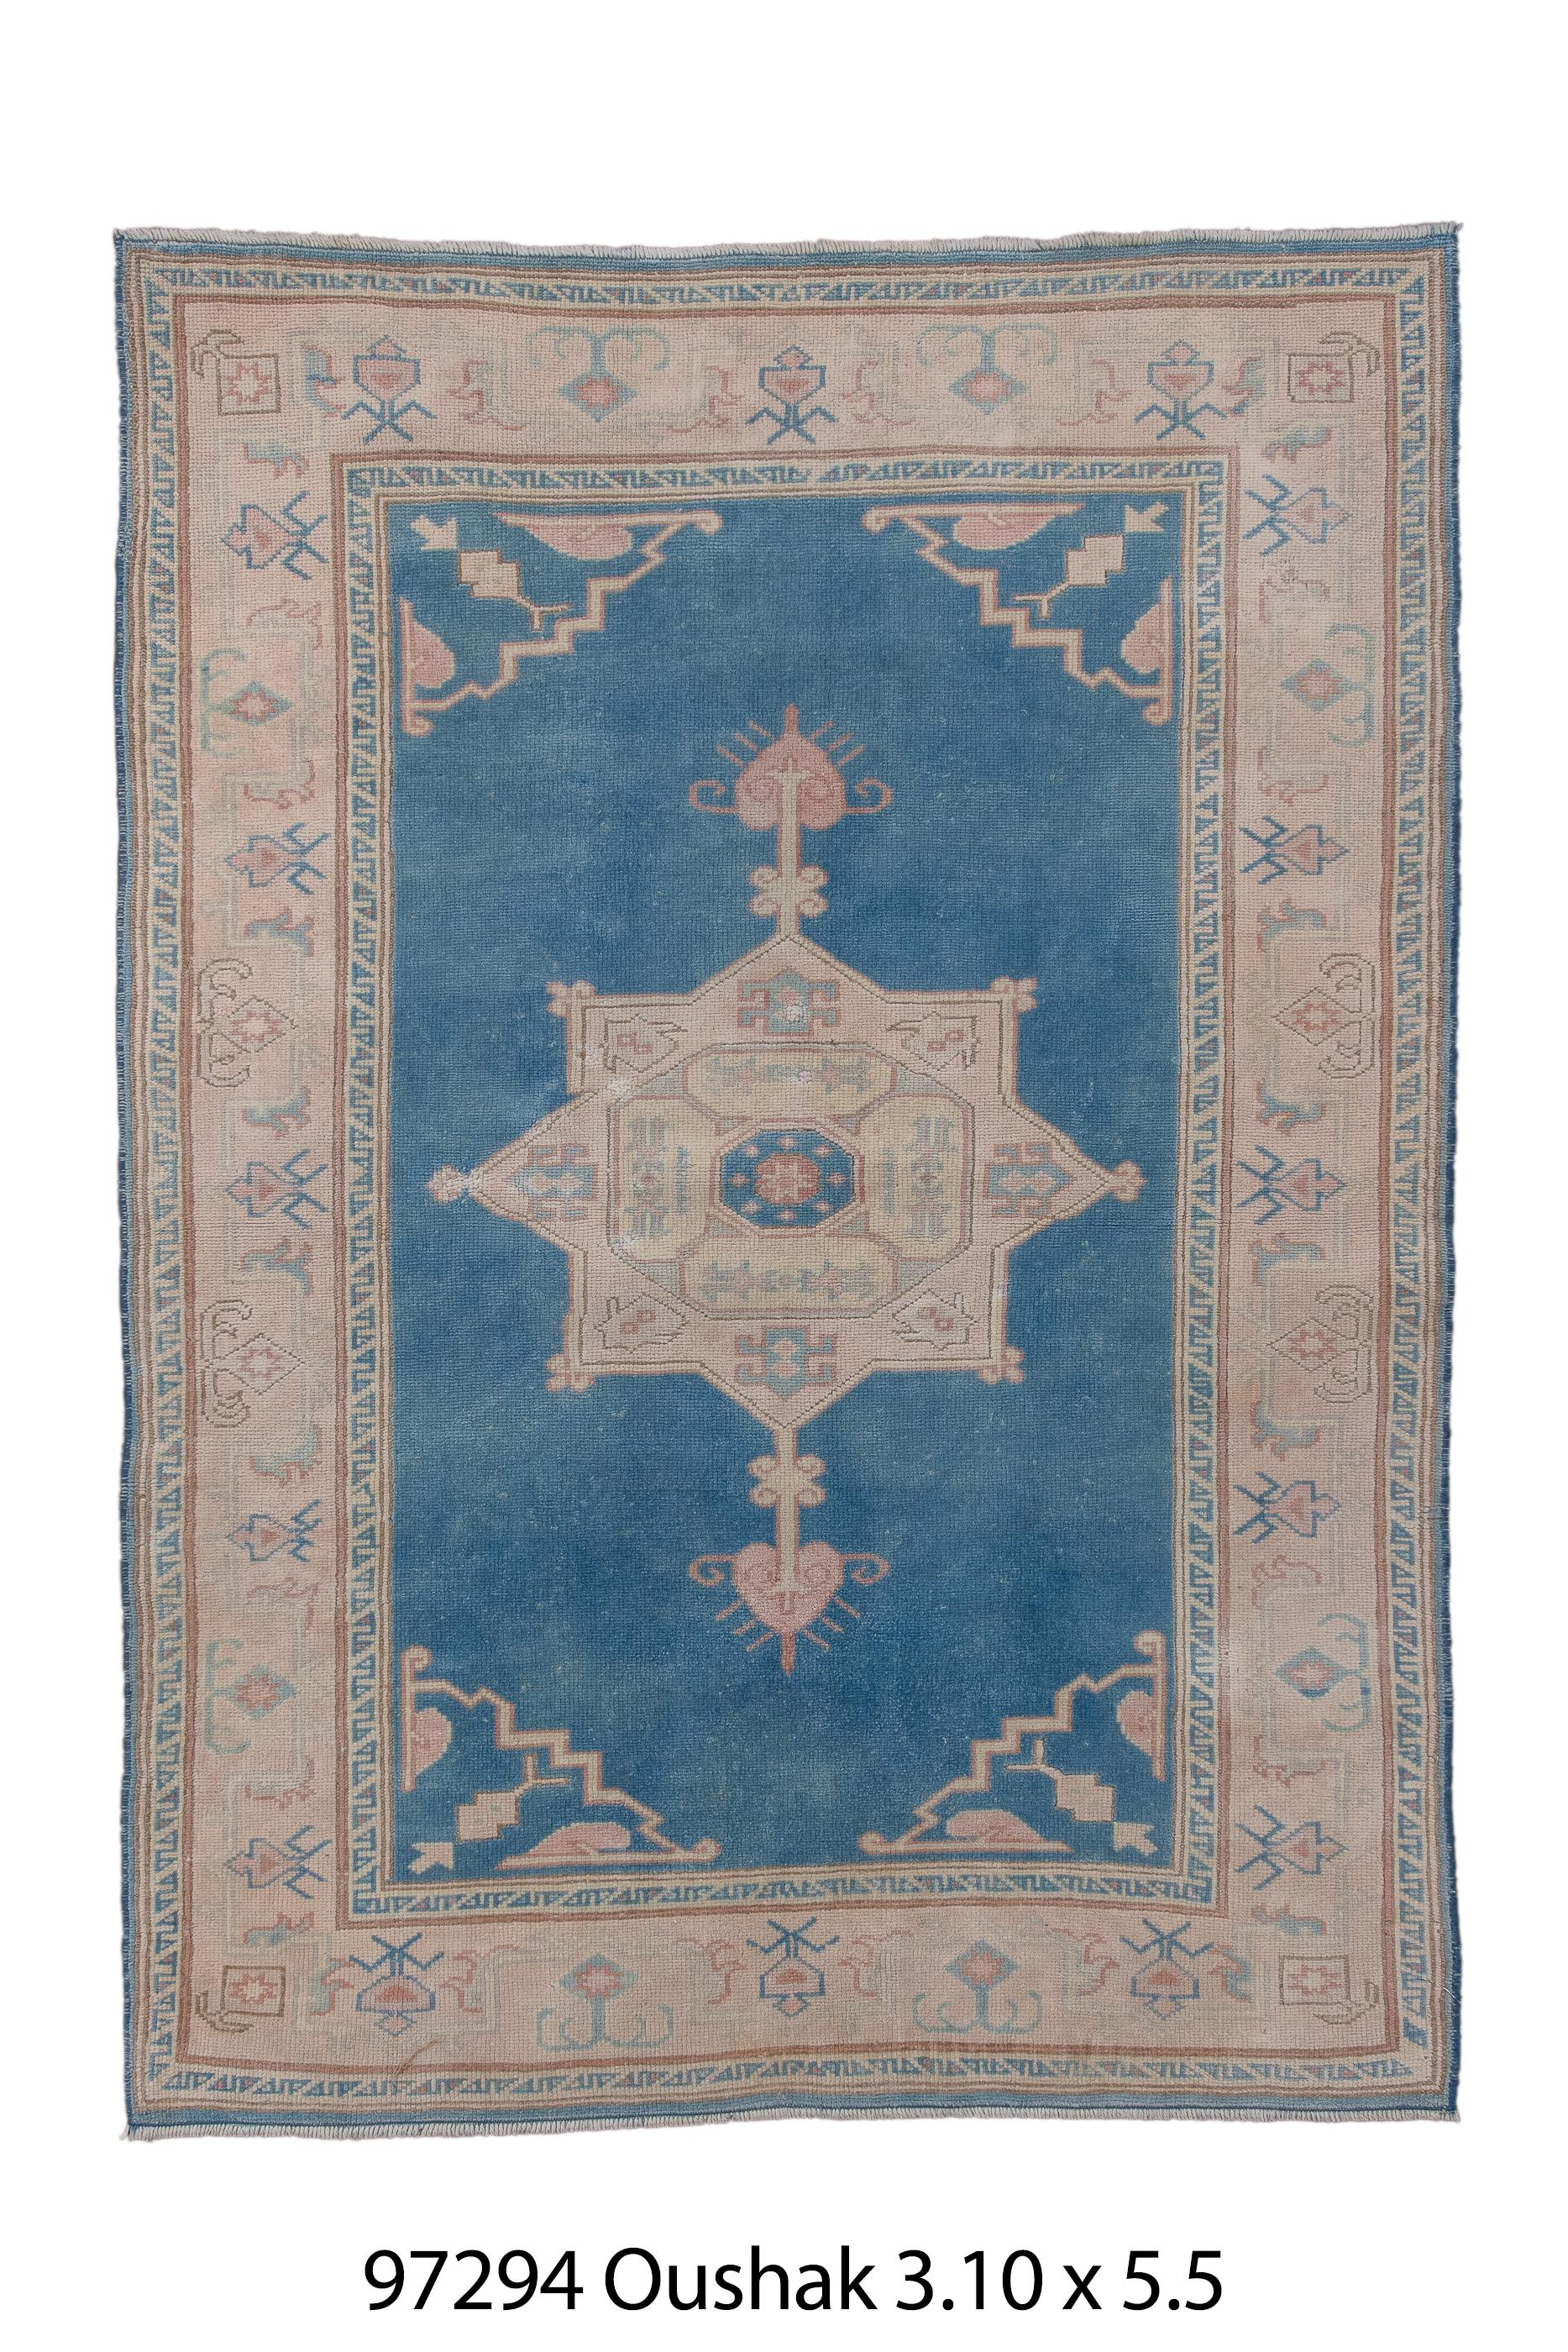 The royal blue open field hosts a centrally positioned pendanted, cream Octobergramme medallion, with stepped, sketchy blue corners.  Sandy straw main border with humanoid stick figures and small lozenges. Moderate weave.  Good condition.

Rug